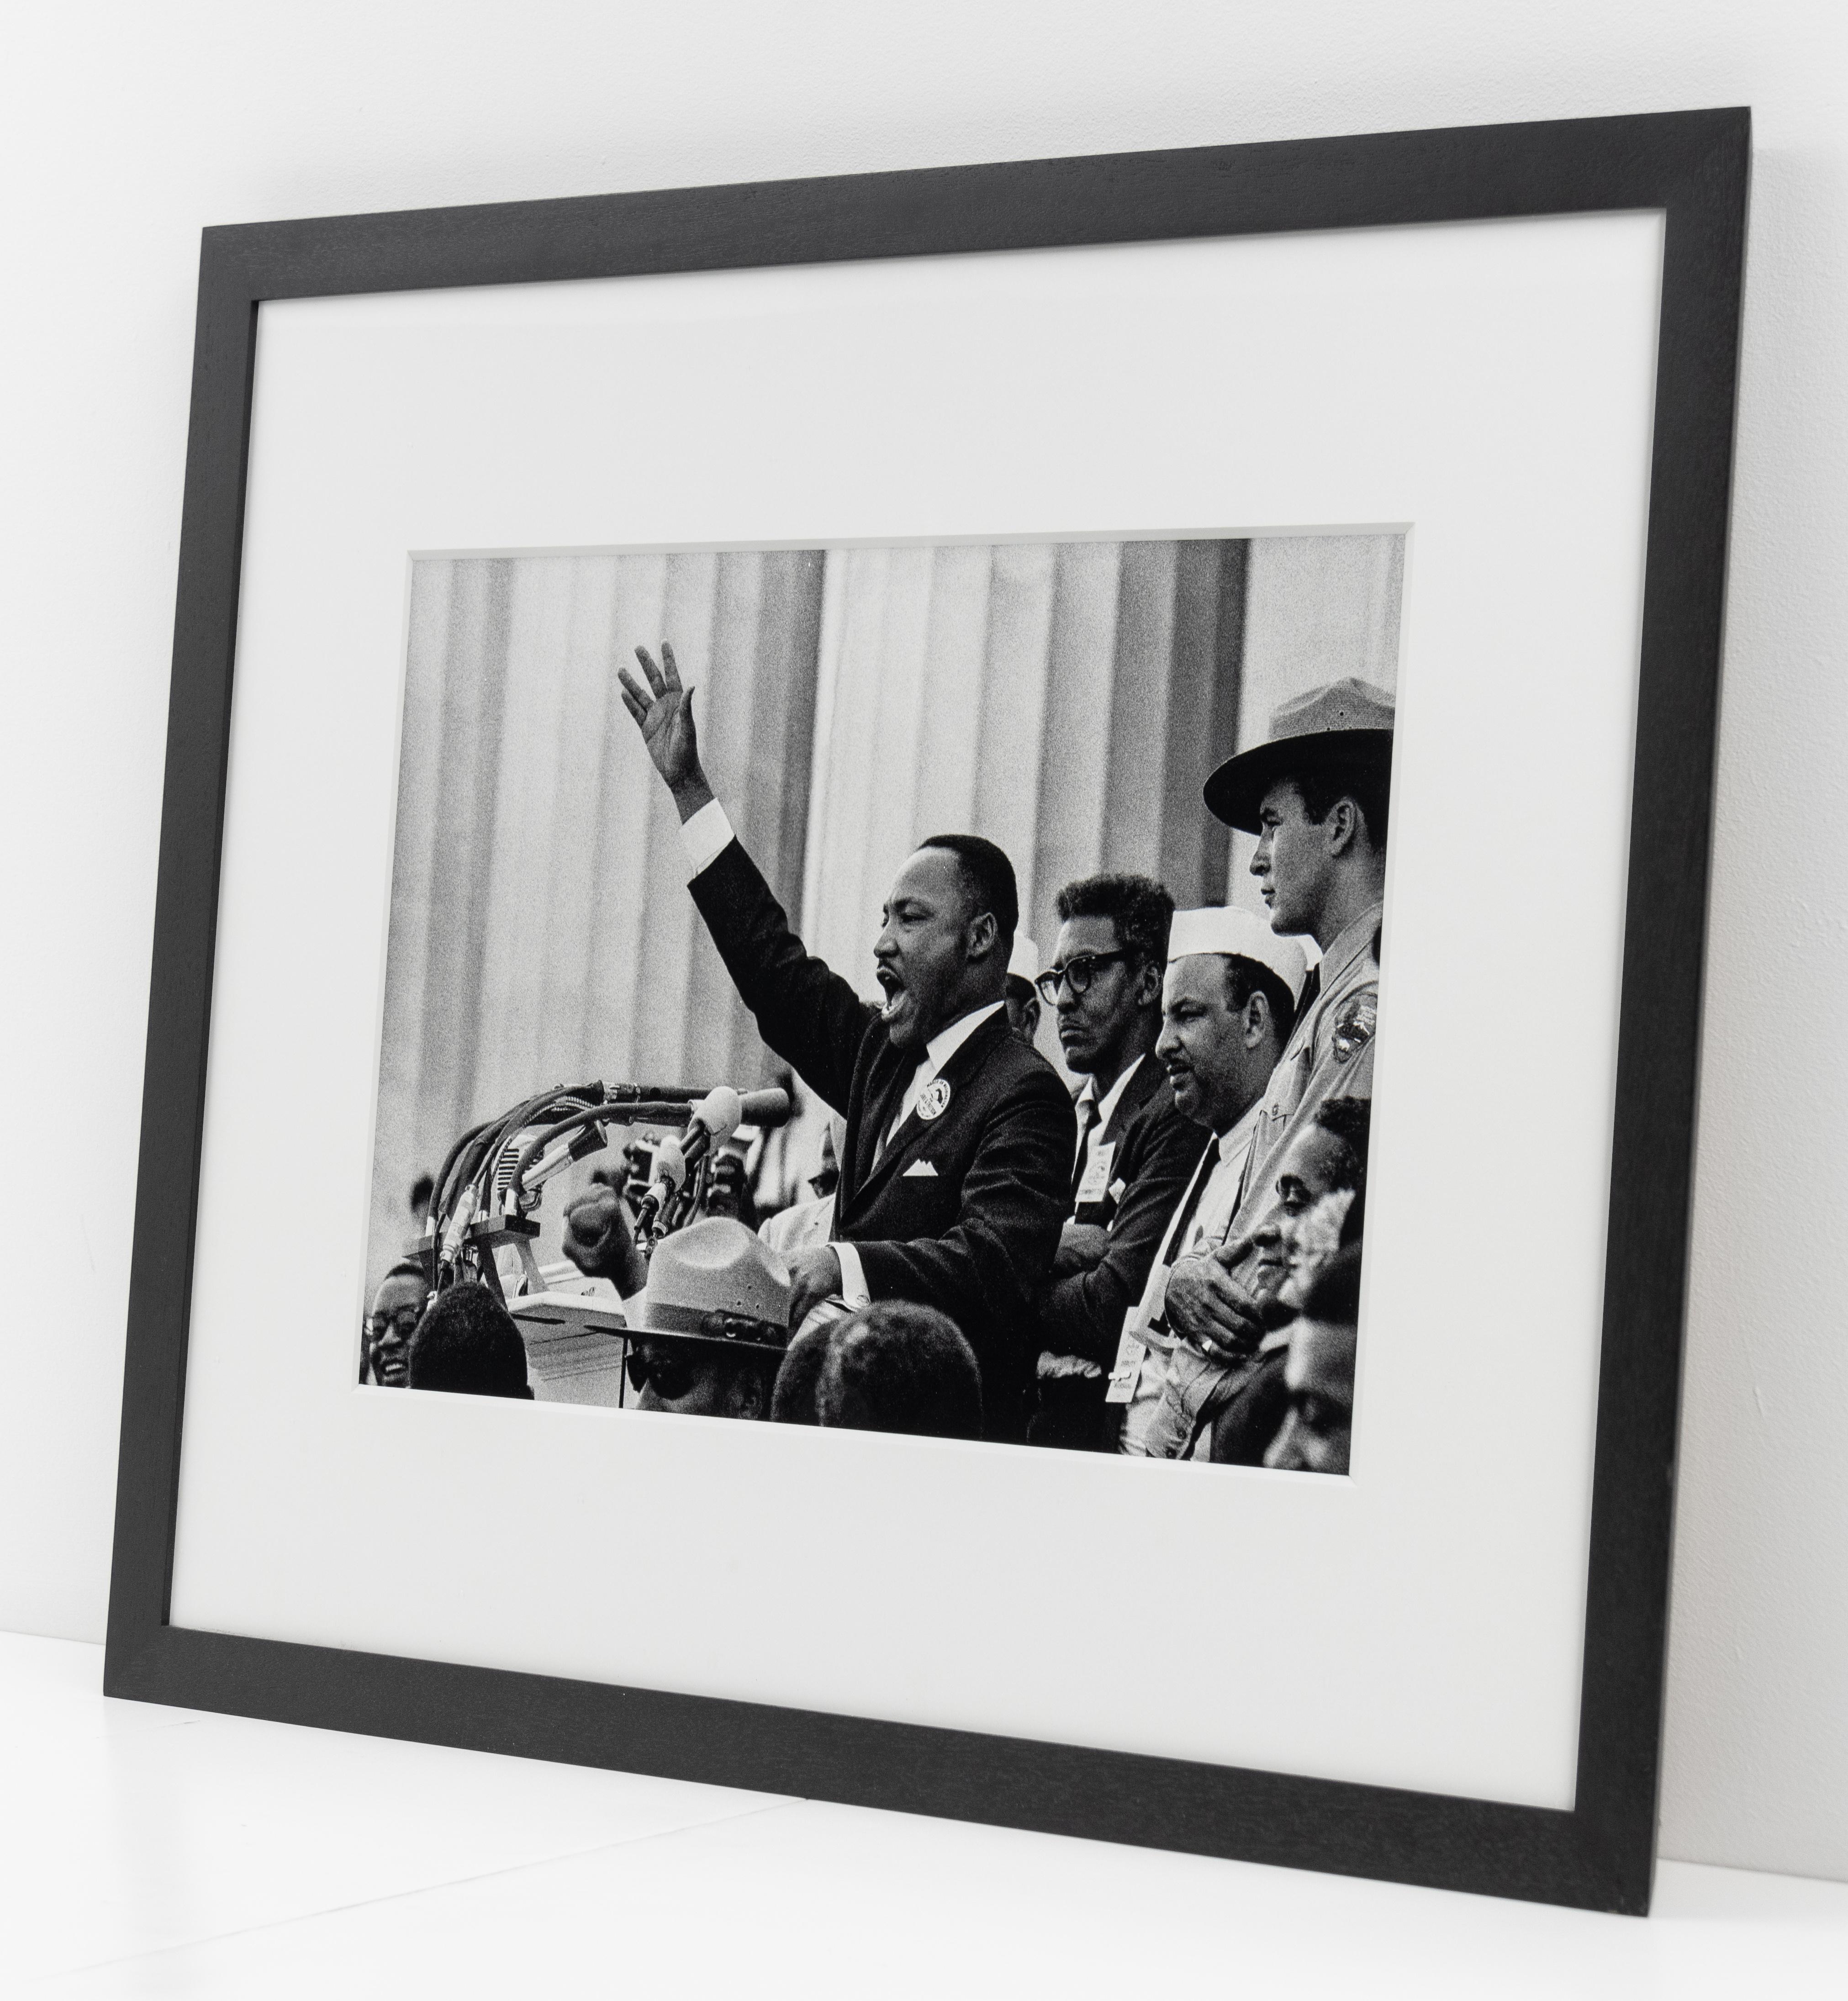 This photograph of Martin Luther King Jr. giving his 